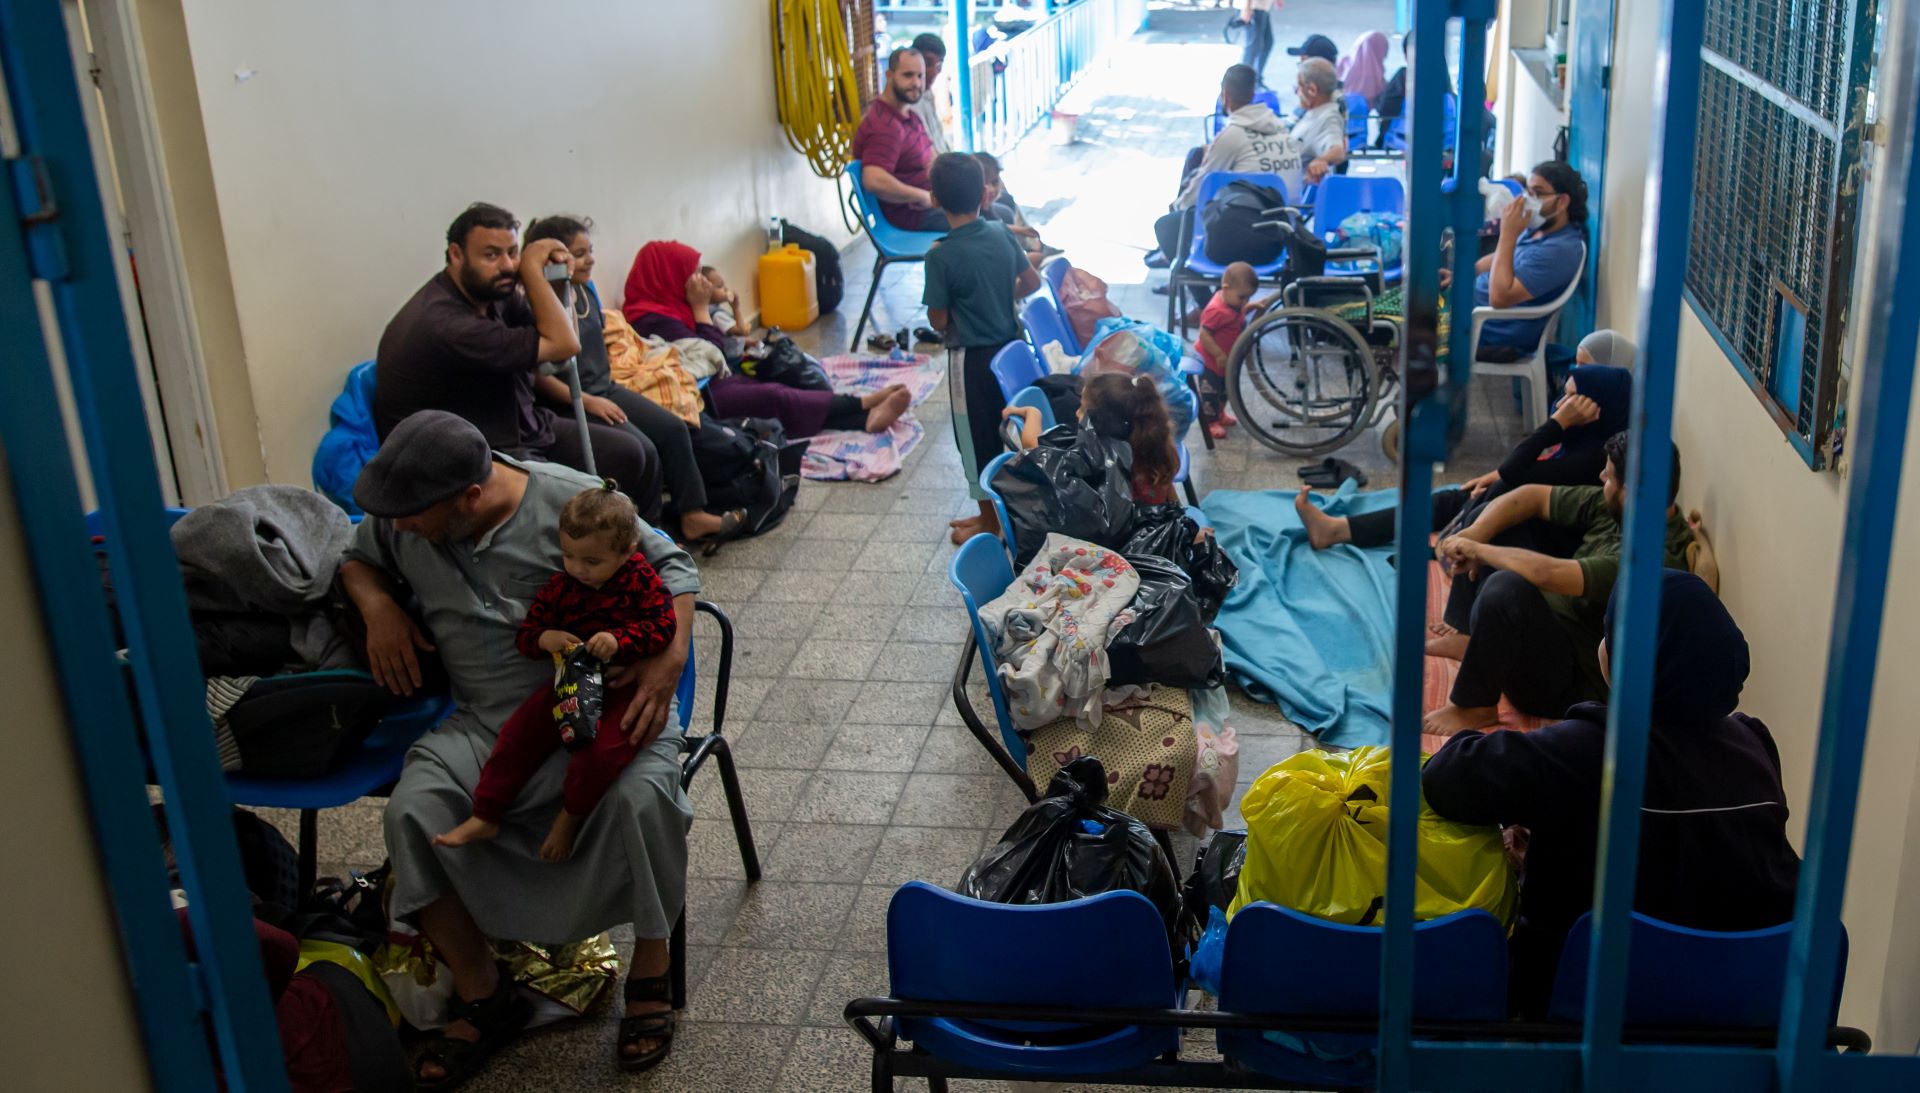 People crowded into the corridor of a hospital, many sitting on the floor